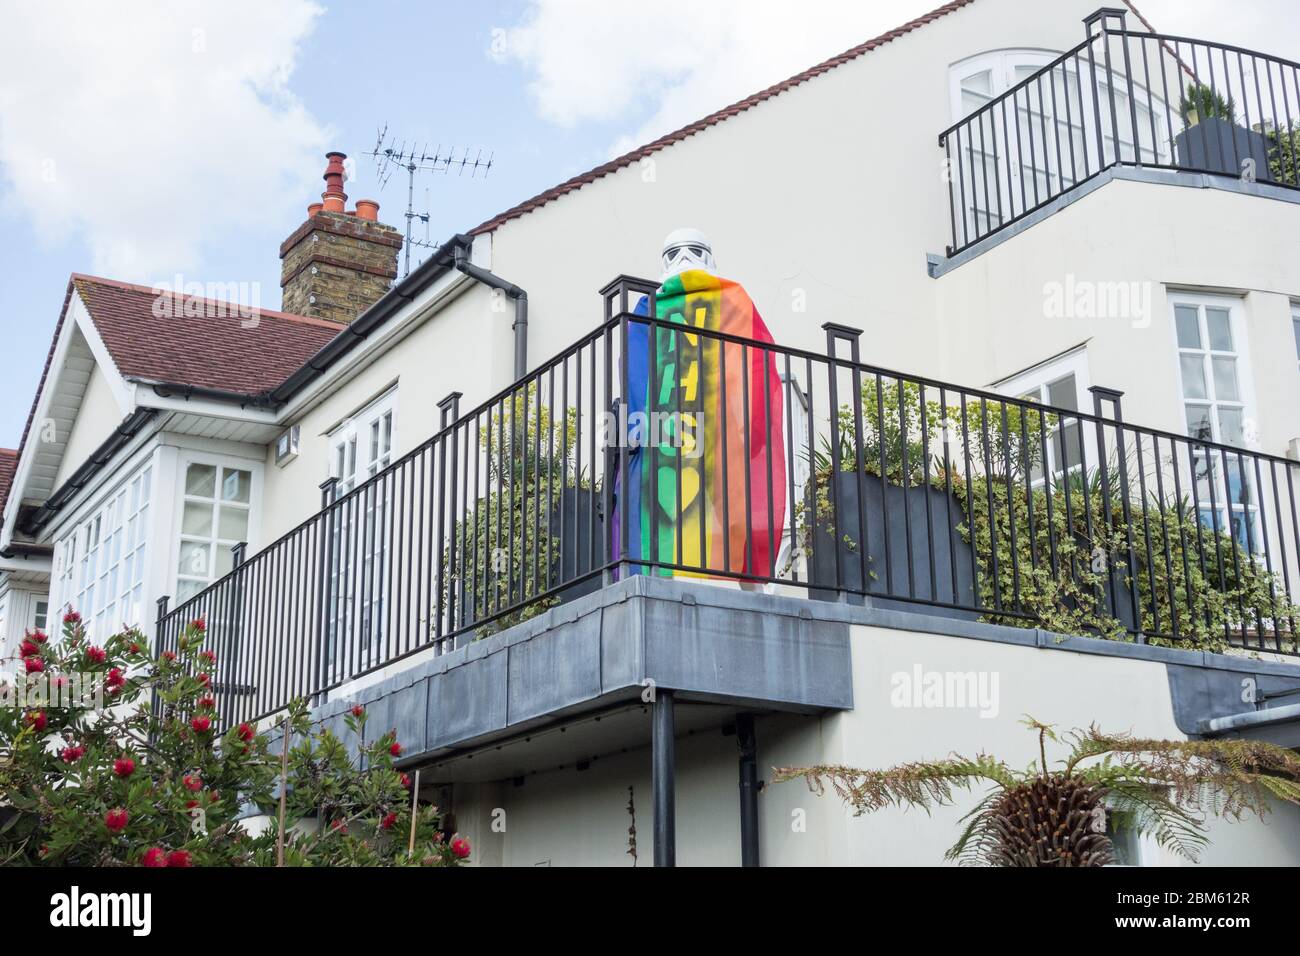 A lifesize Grand Army of the Republic Star Wars Stormtrooper cloaked in an NHS rainbow flag in Barnes, SW London, UK Stock Photo